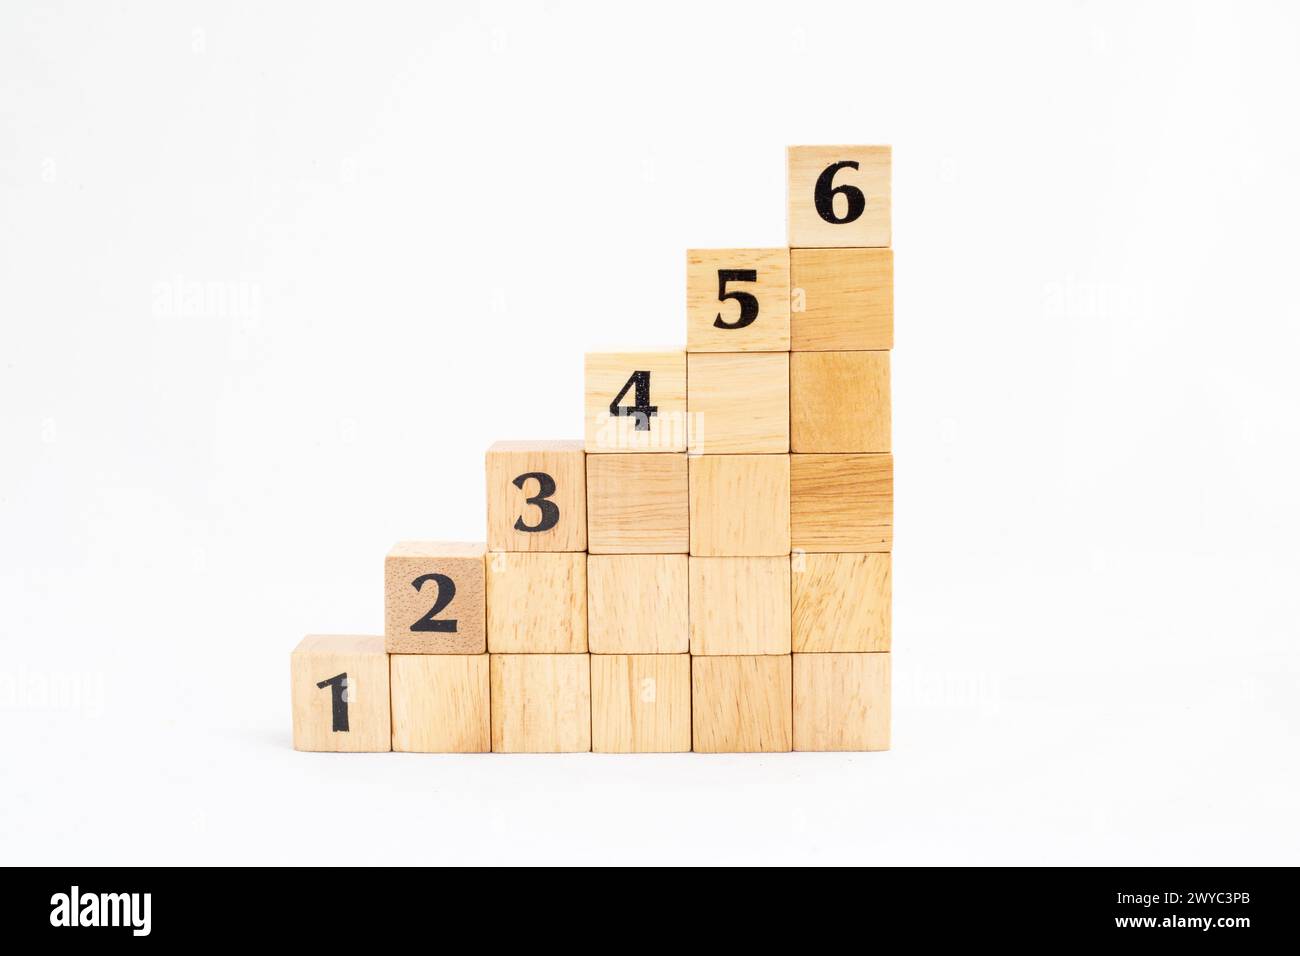 Wooden blocks stacking as step stair with numbers from 1 up to 6 isolated on white background. Business concept growth success process. Copy space. Stock Photo